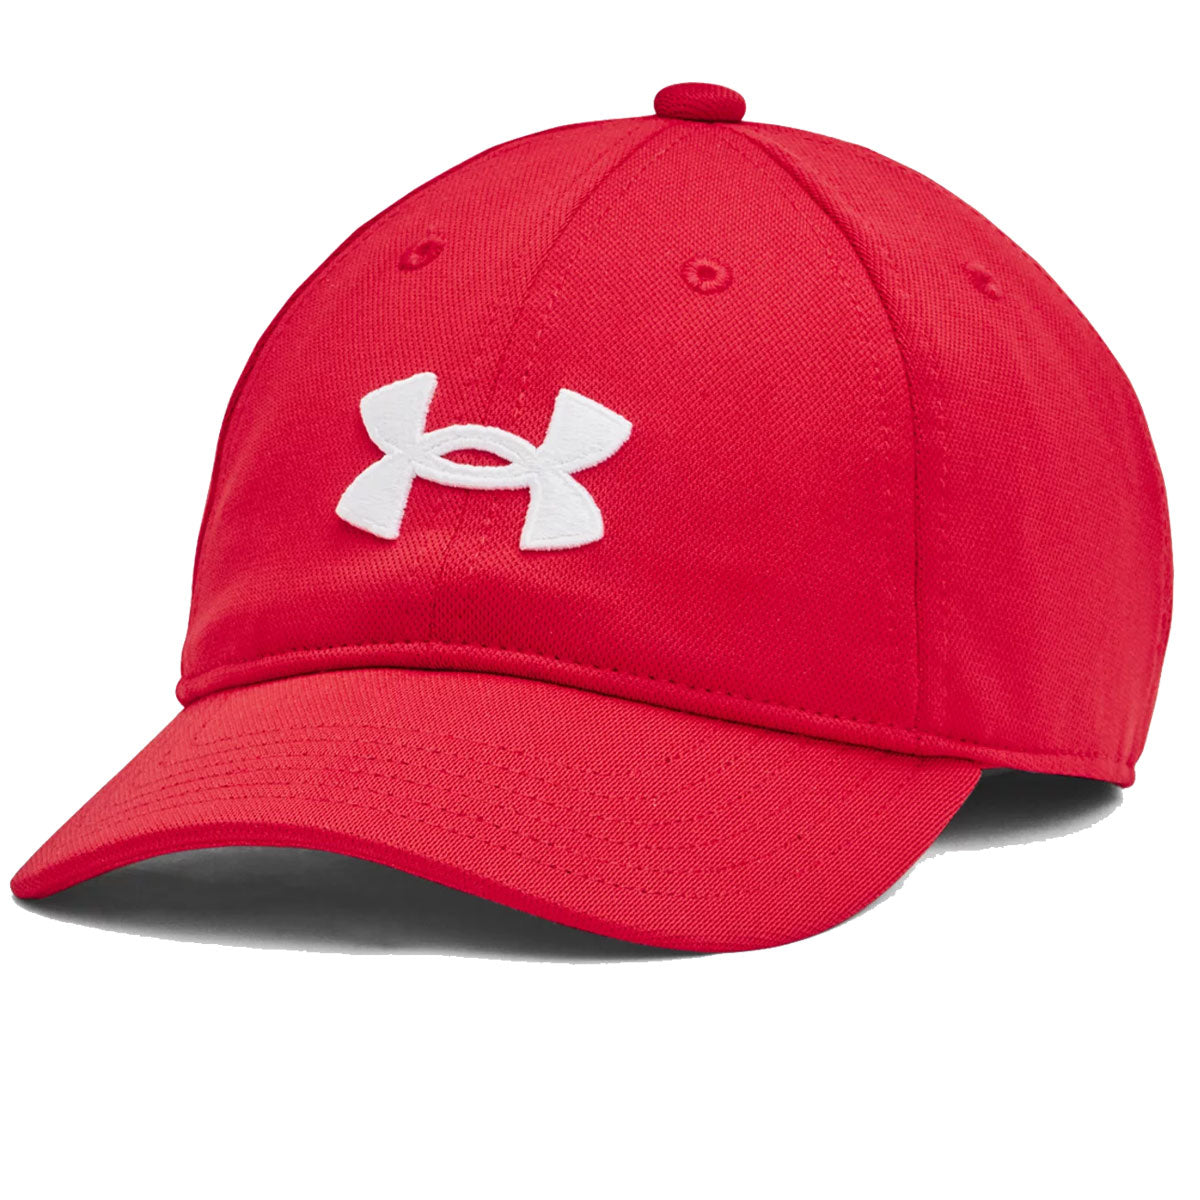 Under Armour Adjustable Blitzing Cap - Youth - Red/White